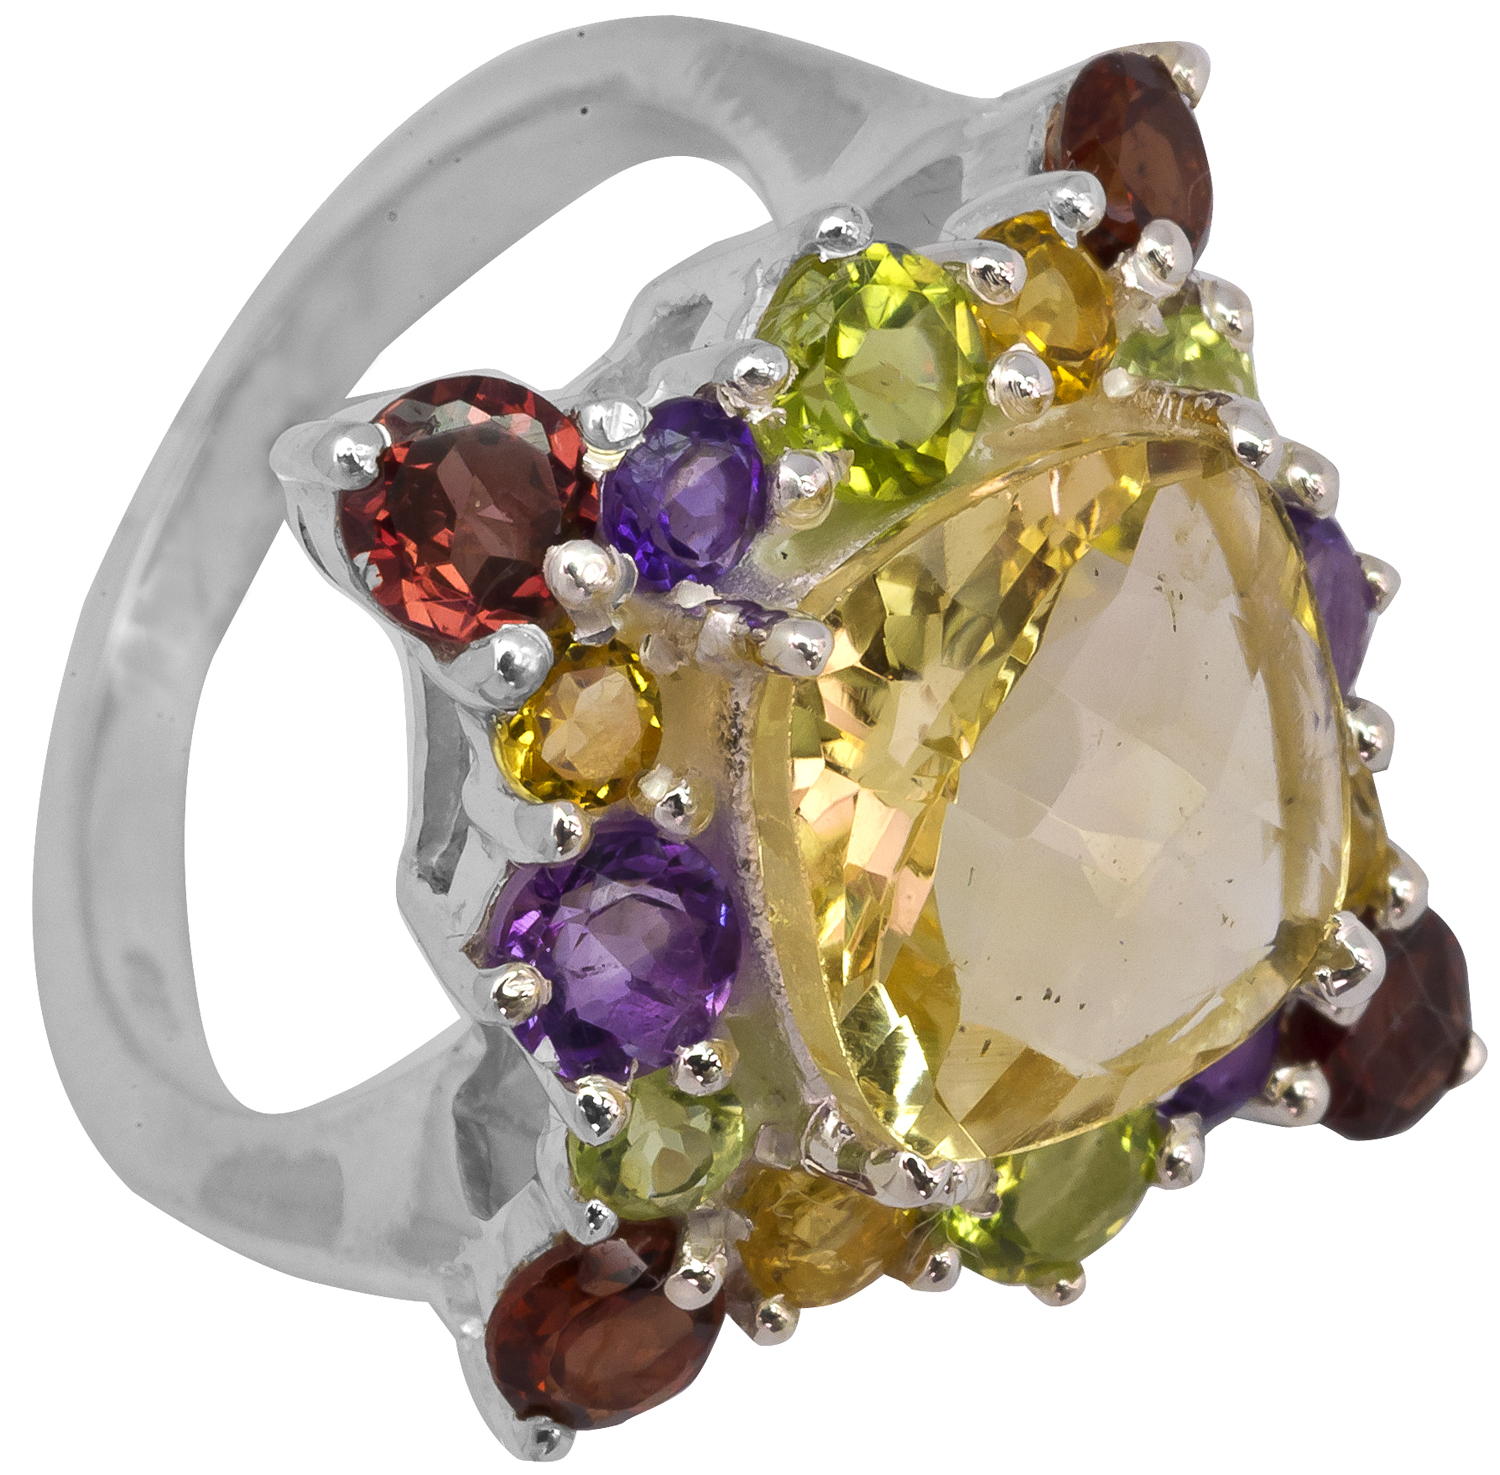 Autumn Garnet, Peridot And Citrine Sterling Silver Ring By Alison Moore  Designs | notonthehighstreet.com